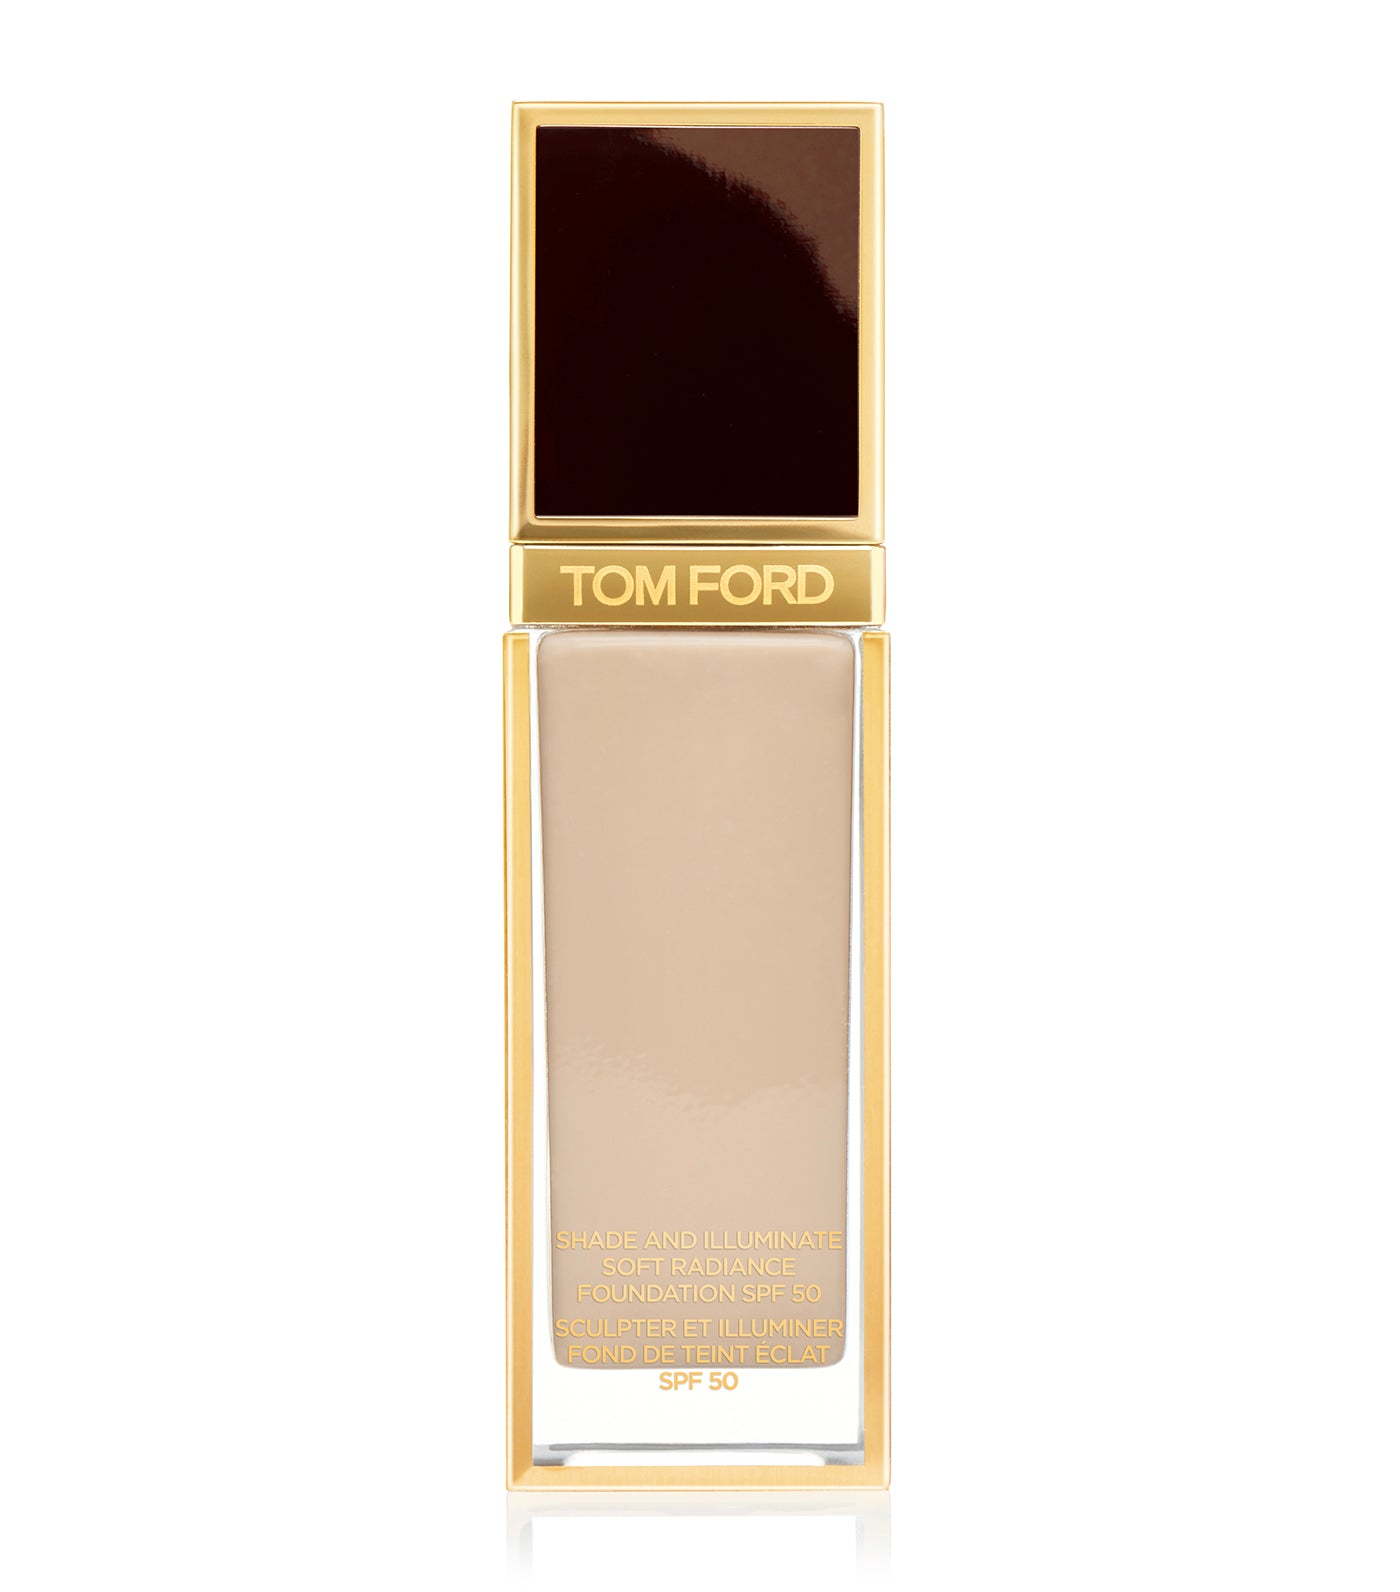 tom ford shade and illuminate soft radiance foundation spf 50/pa++++ bisque